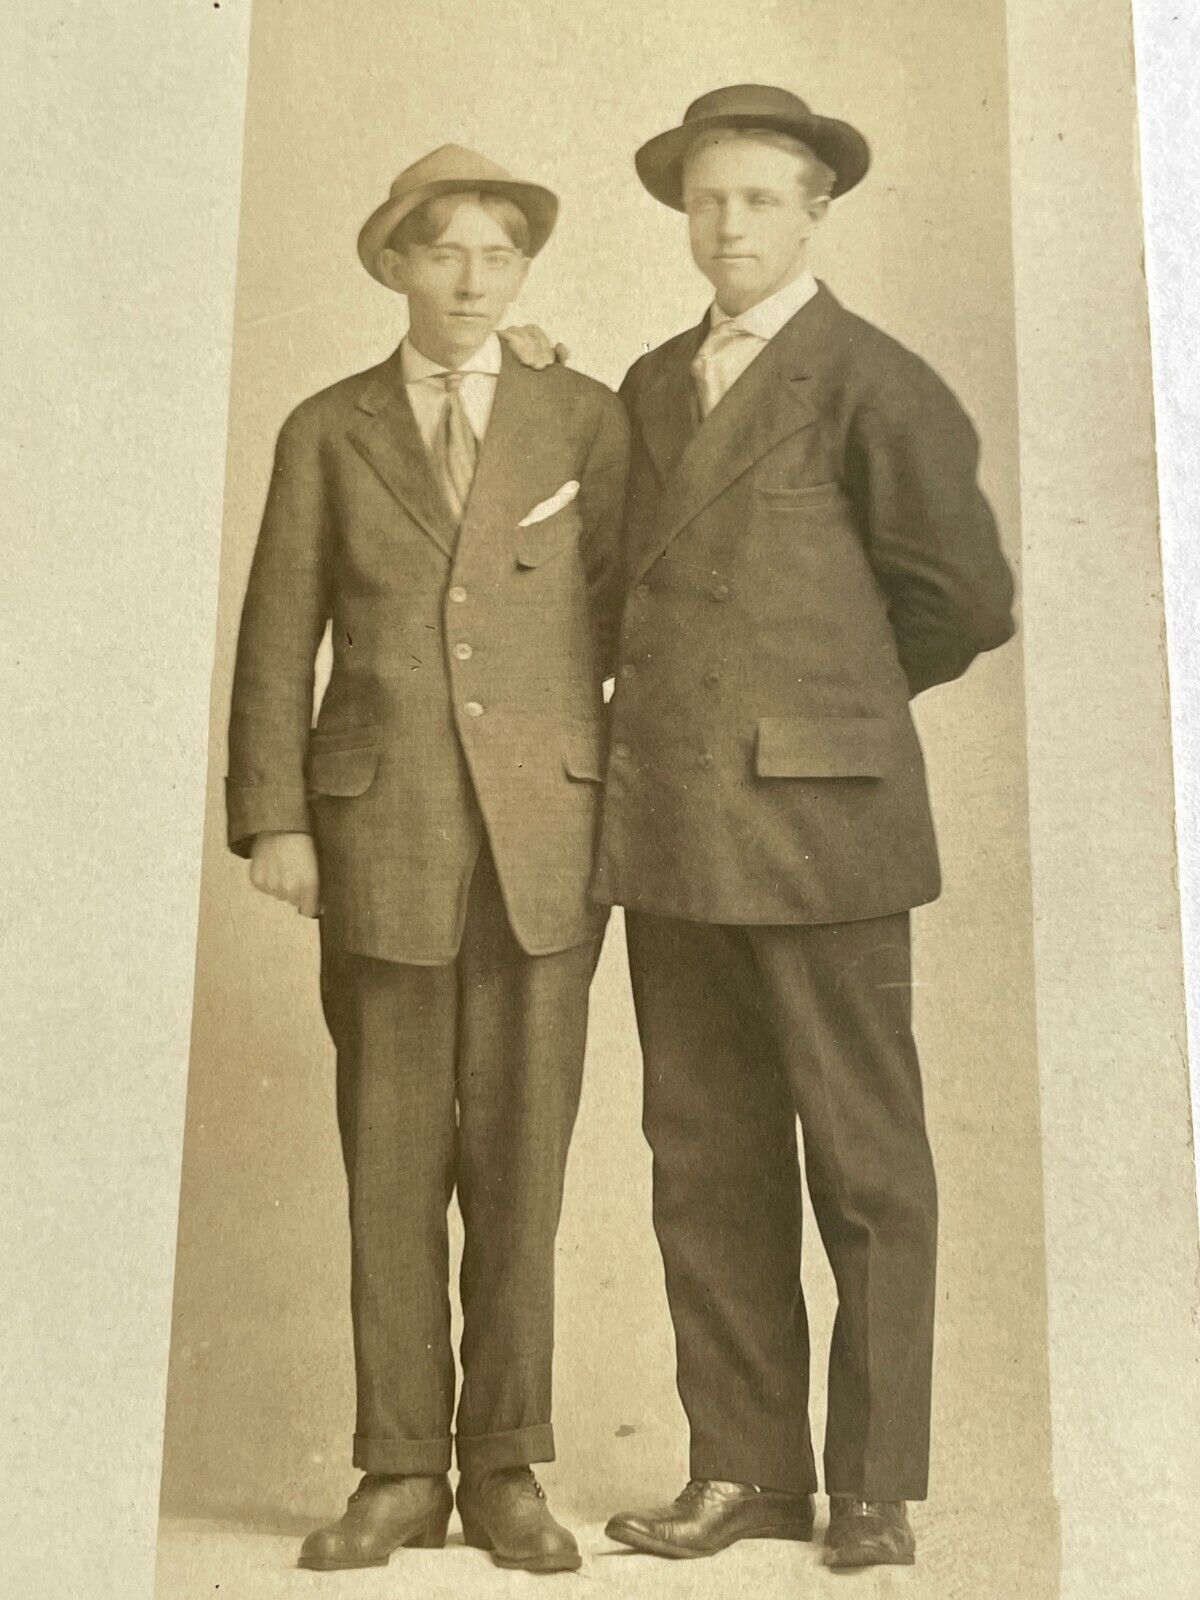 H4 RPPC Postcard Photograph 2 Handsome Brothers 1920's Hat Suits Young Men